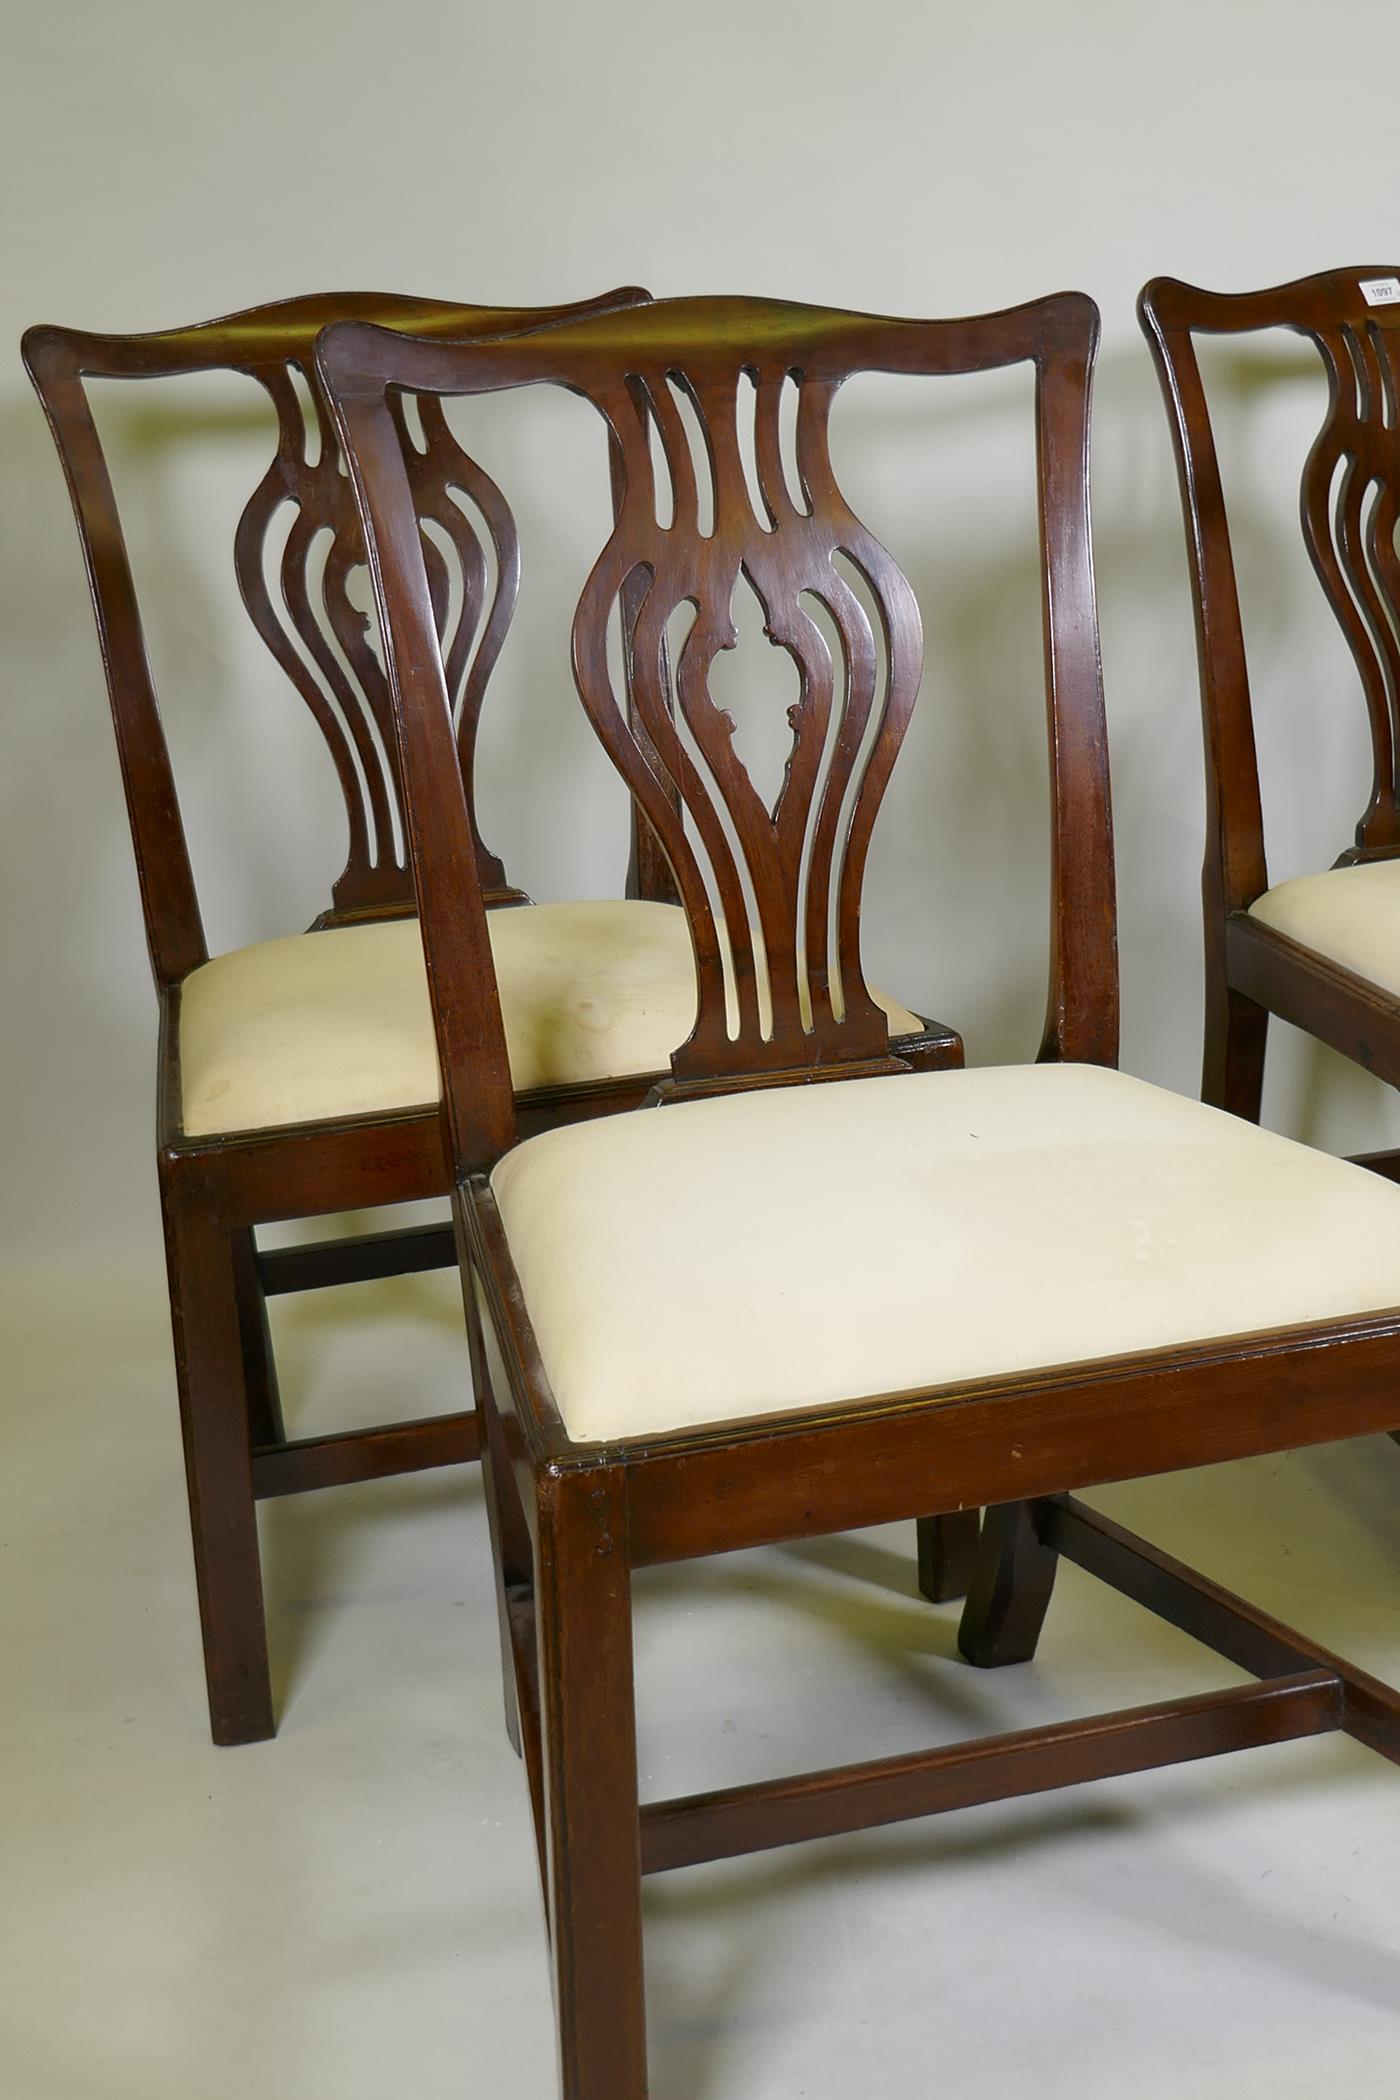 Four C19th mahogany dining chairs with pierced vase splat backs, drop in seats, raised on square - Image 2 of 2